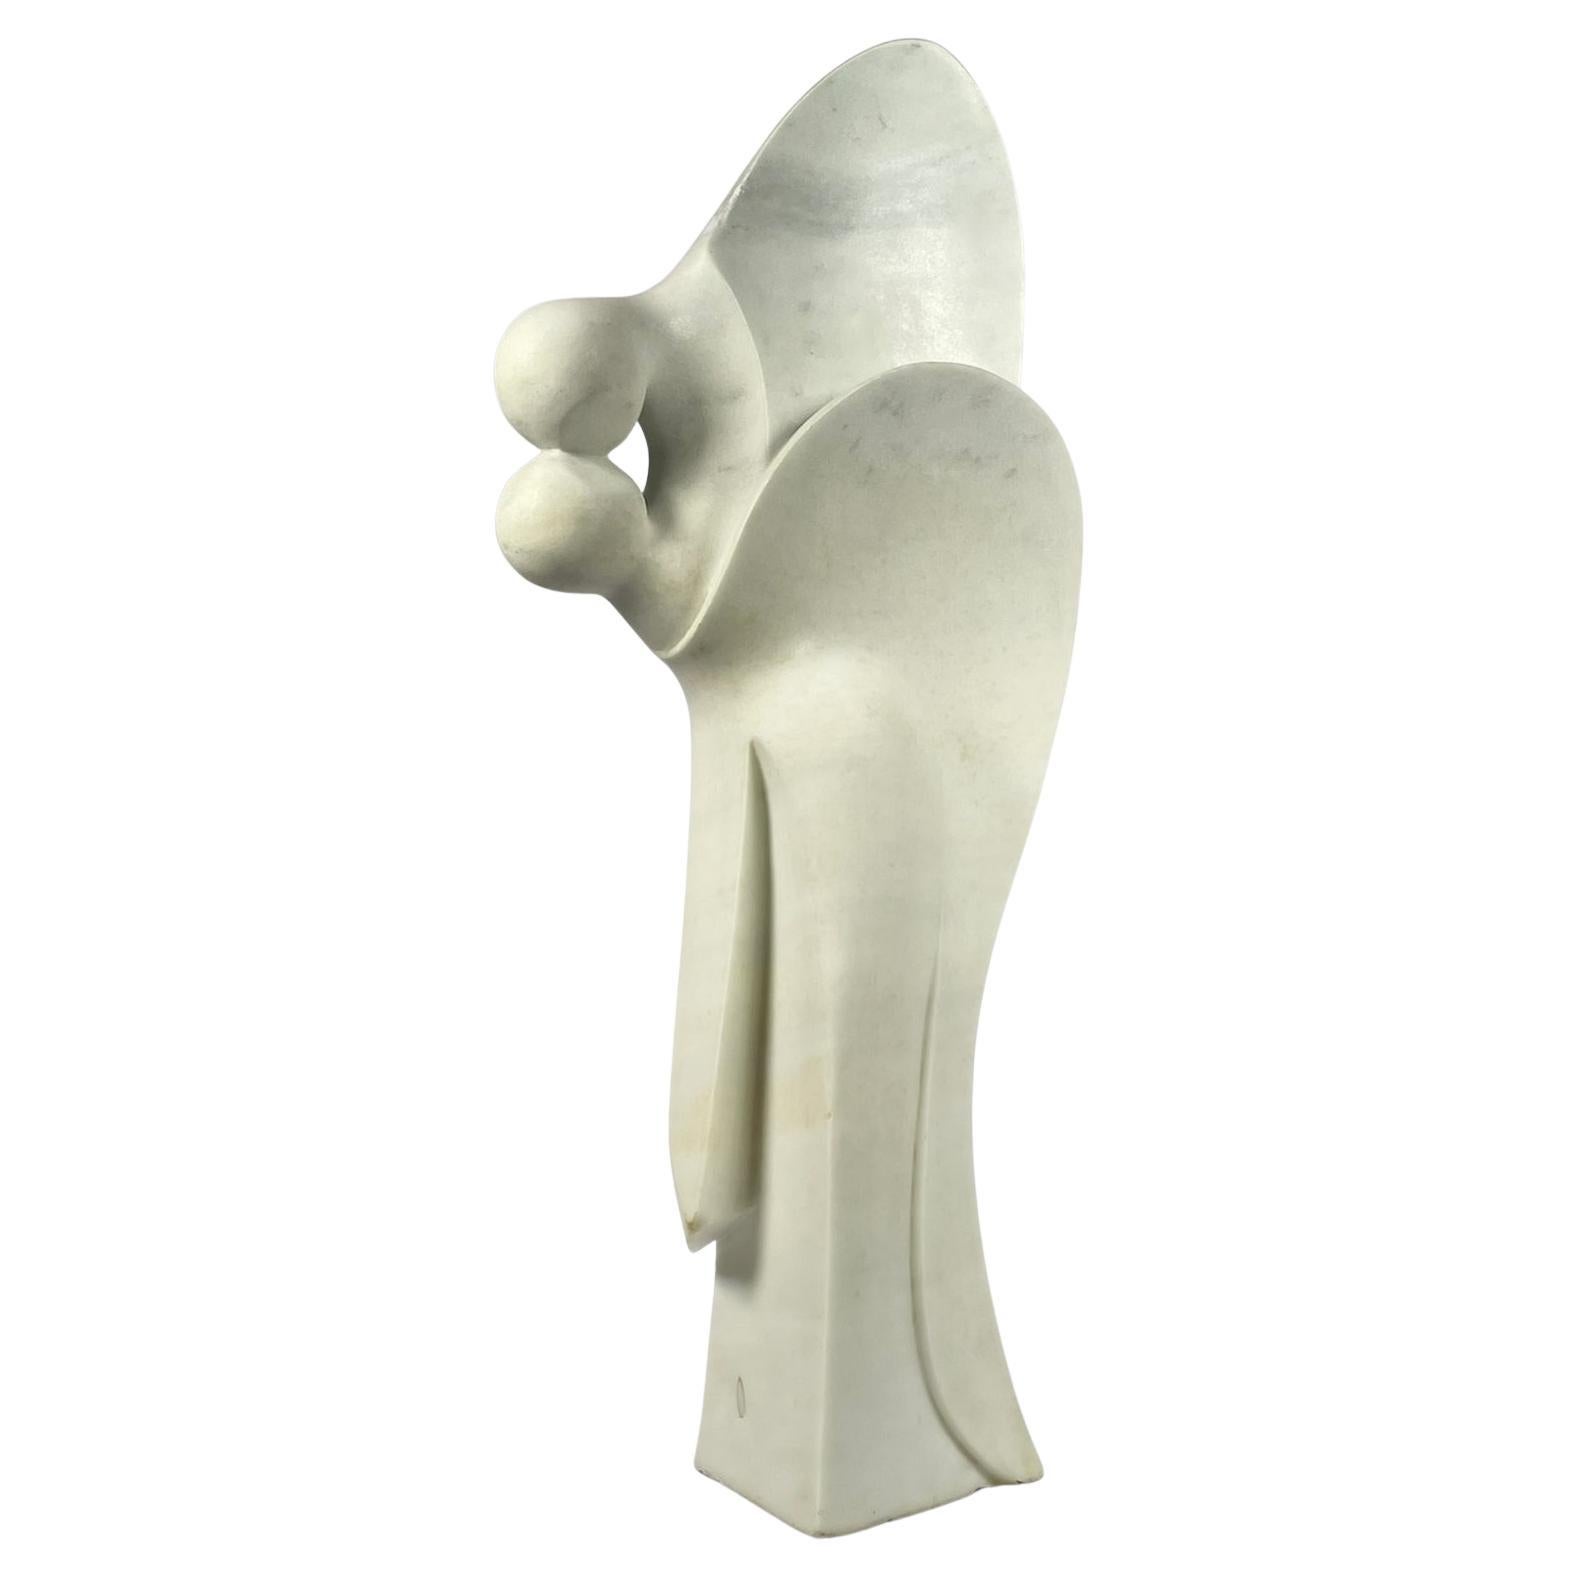 "Angel Kiss" Life Size Granite Sculpture For Sale